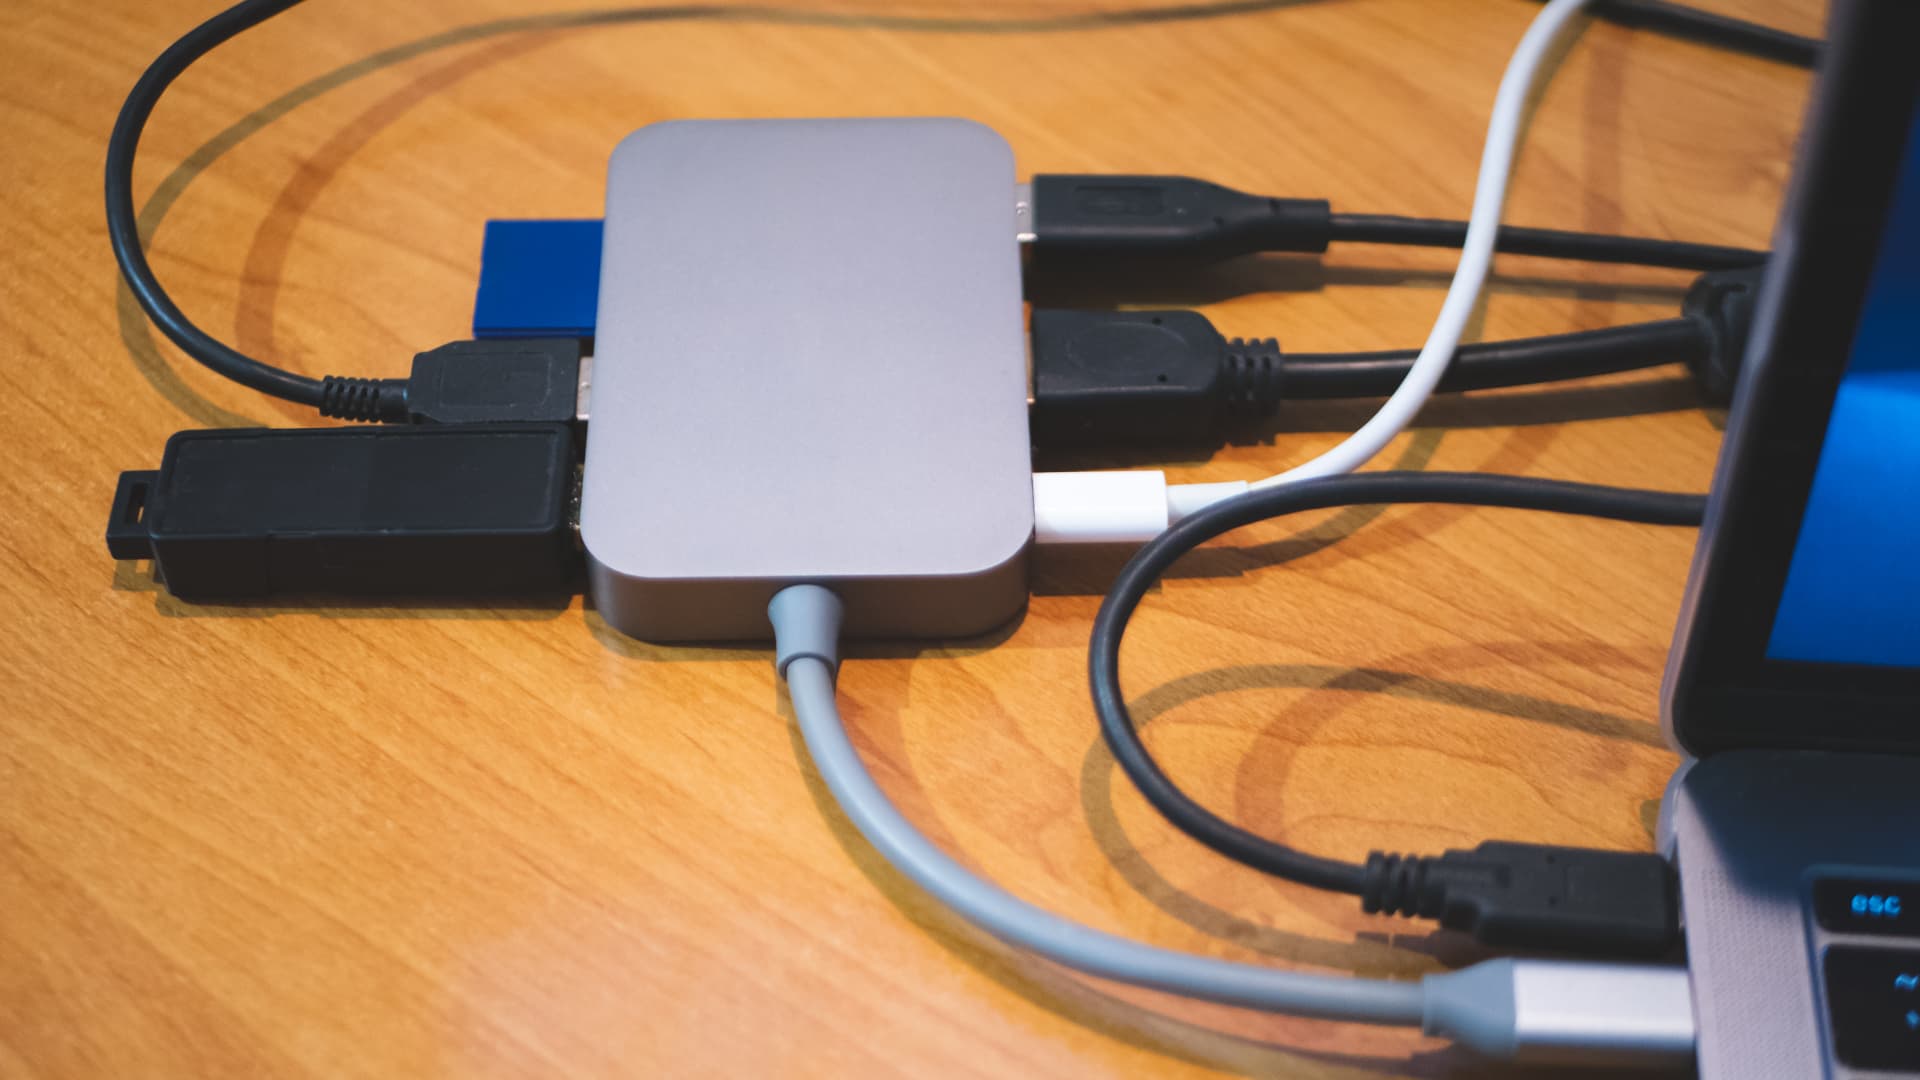 USB Type-C hub connected to a laptop with cables connected for peripheral computer device equipment